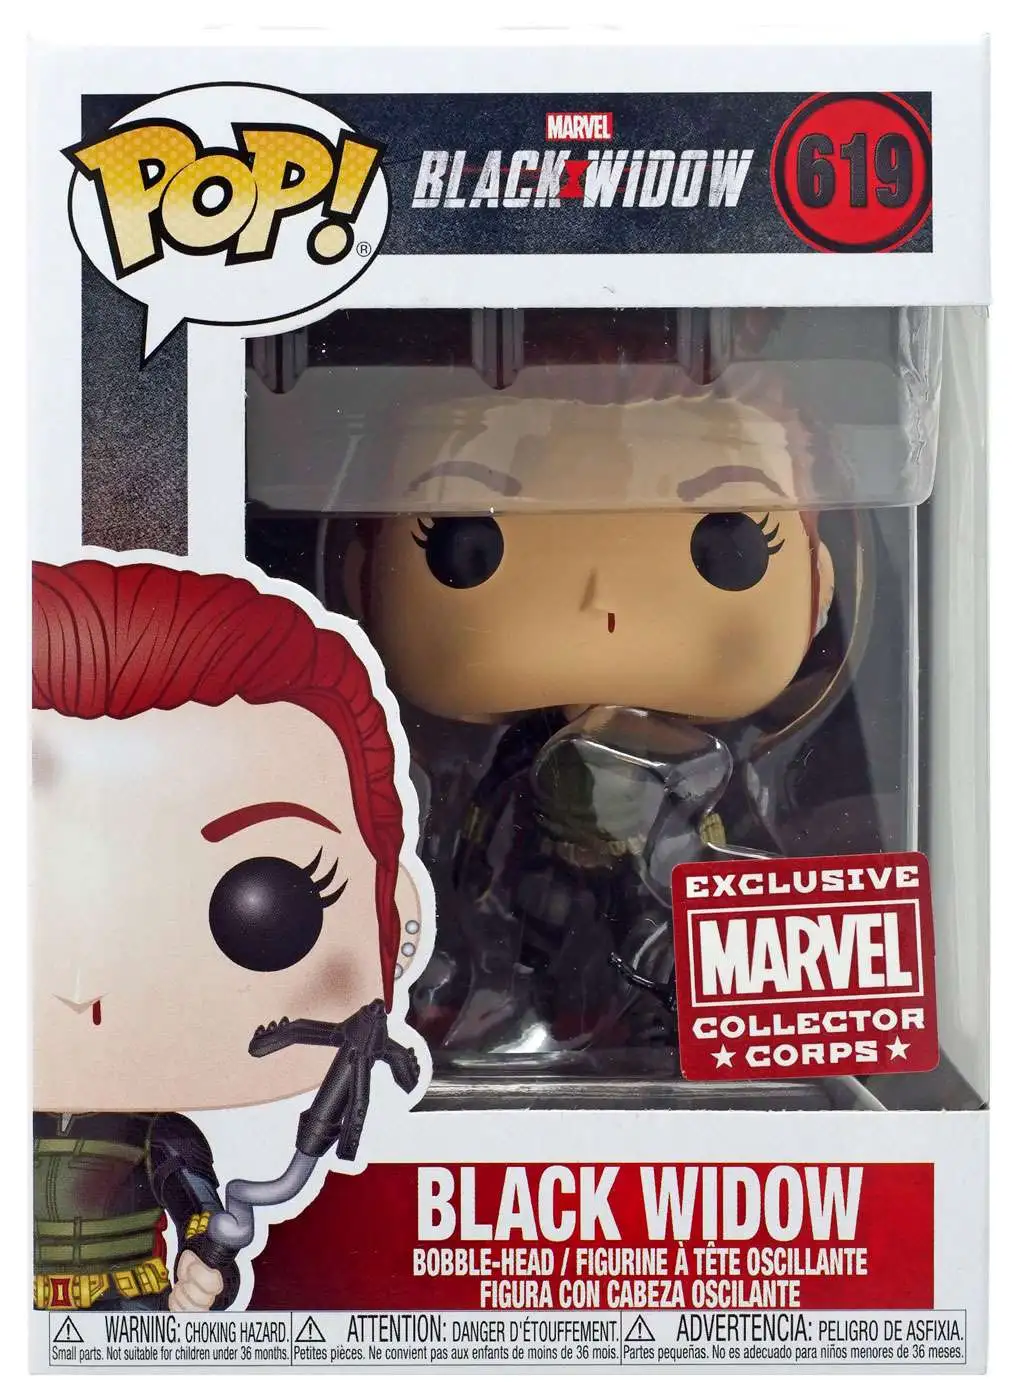 Funko Pop Black Widow Movie 619 Marvel Collector Corps 2020 for sale online 